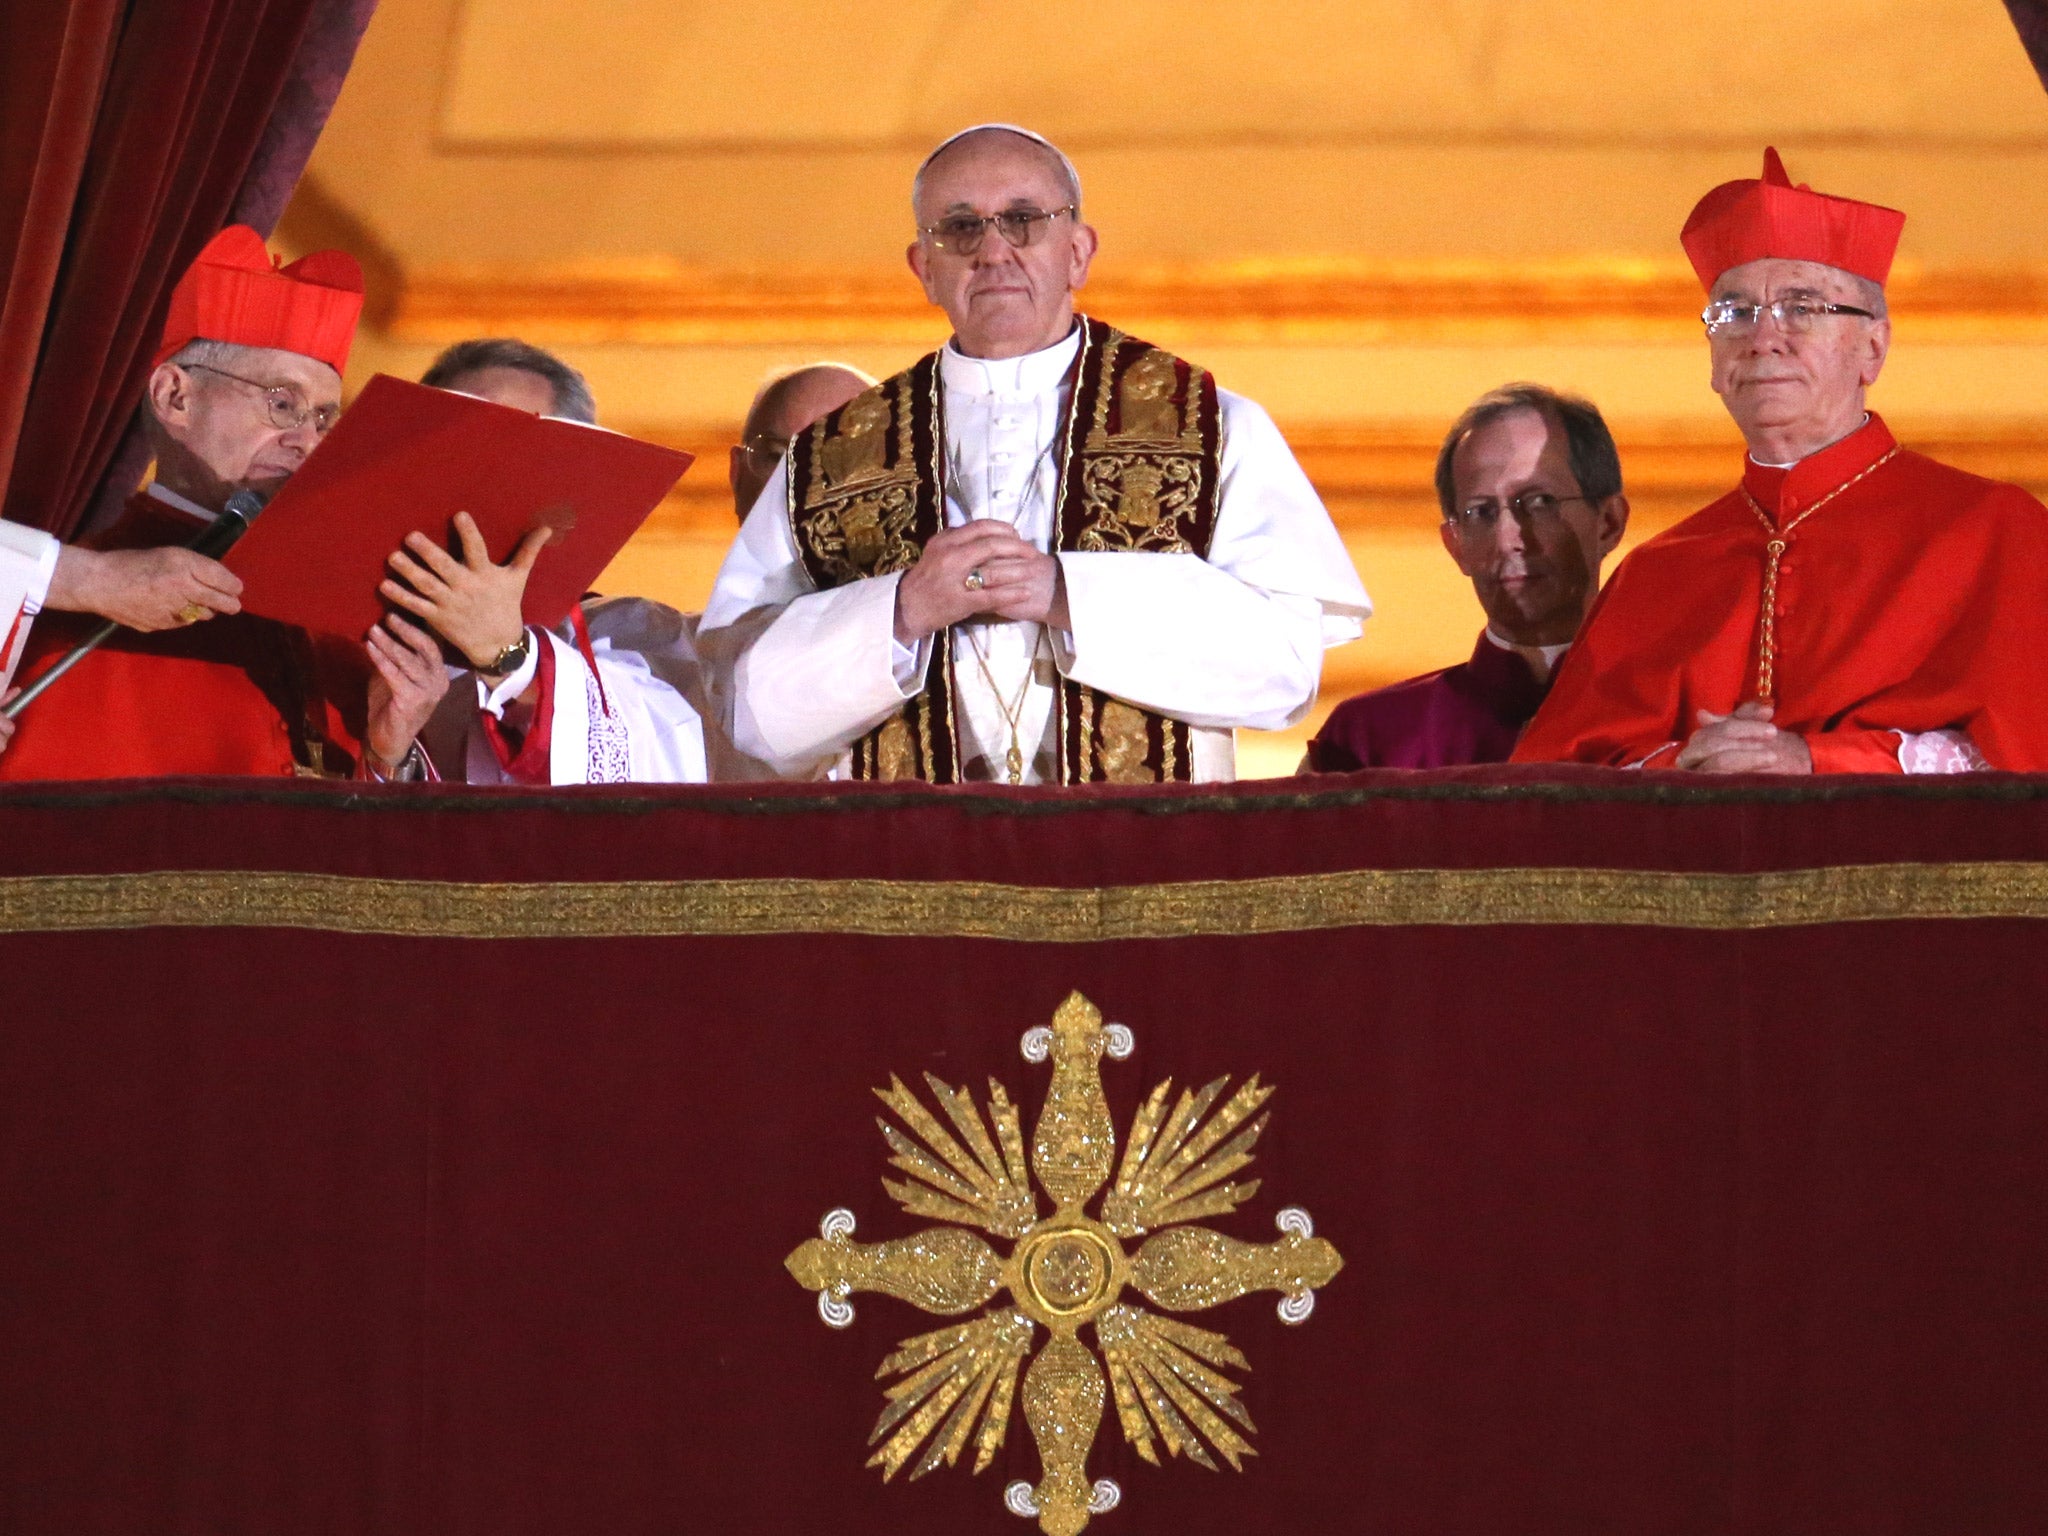 Newly elected Pope Francis I appears on the central balcony of St Peter's Basilica